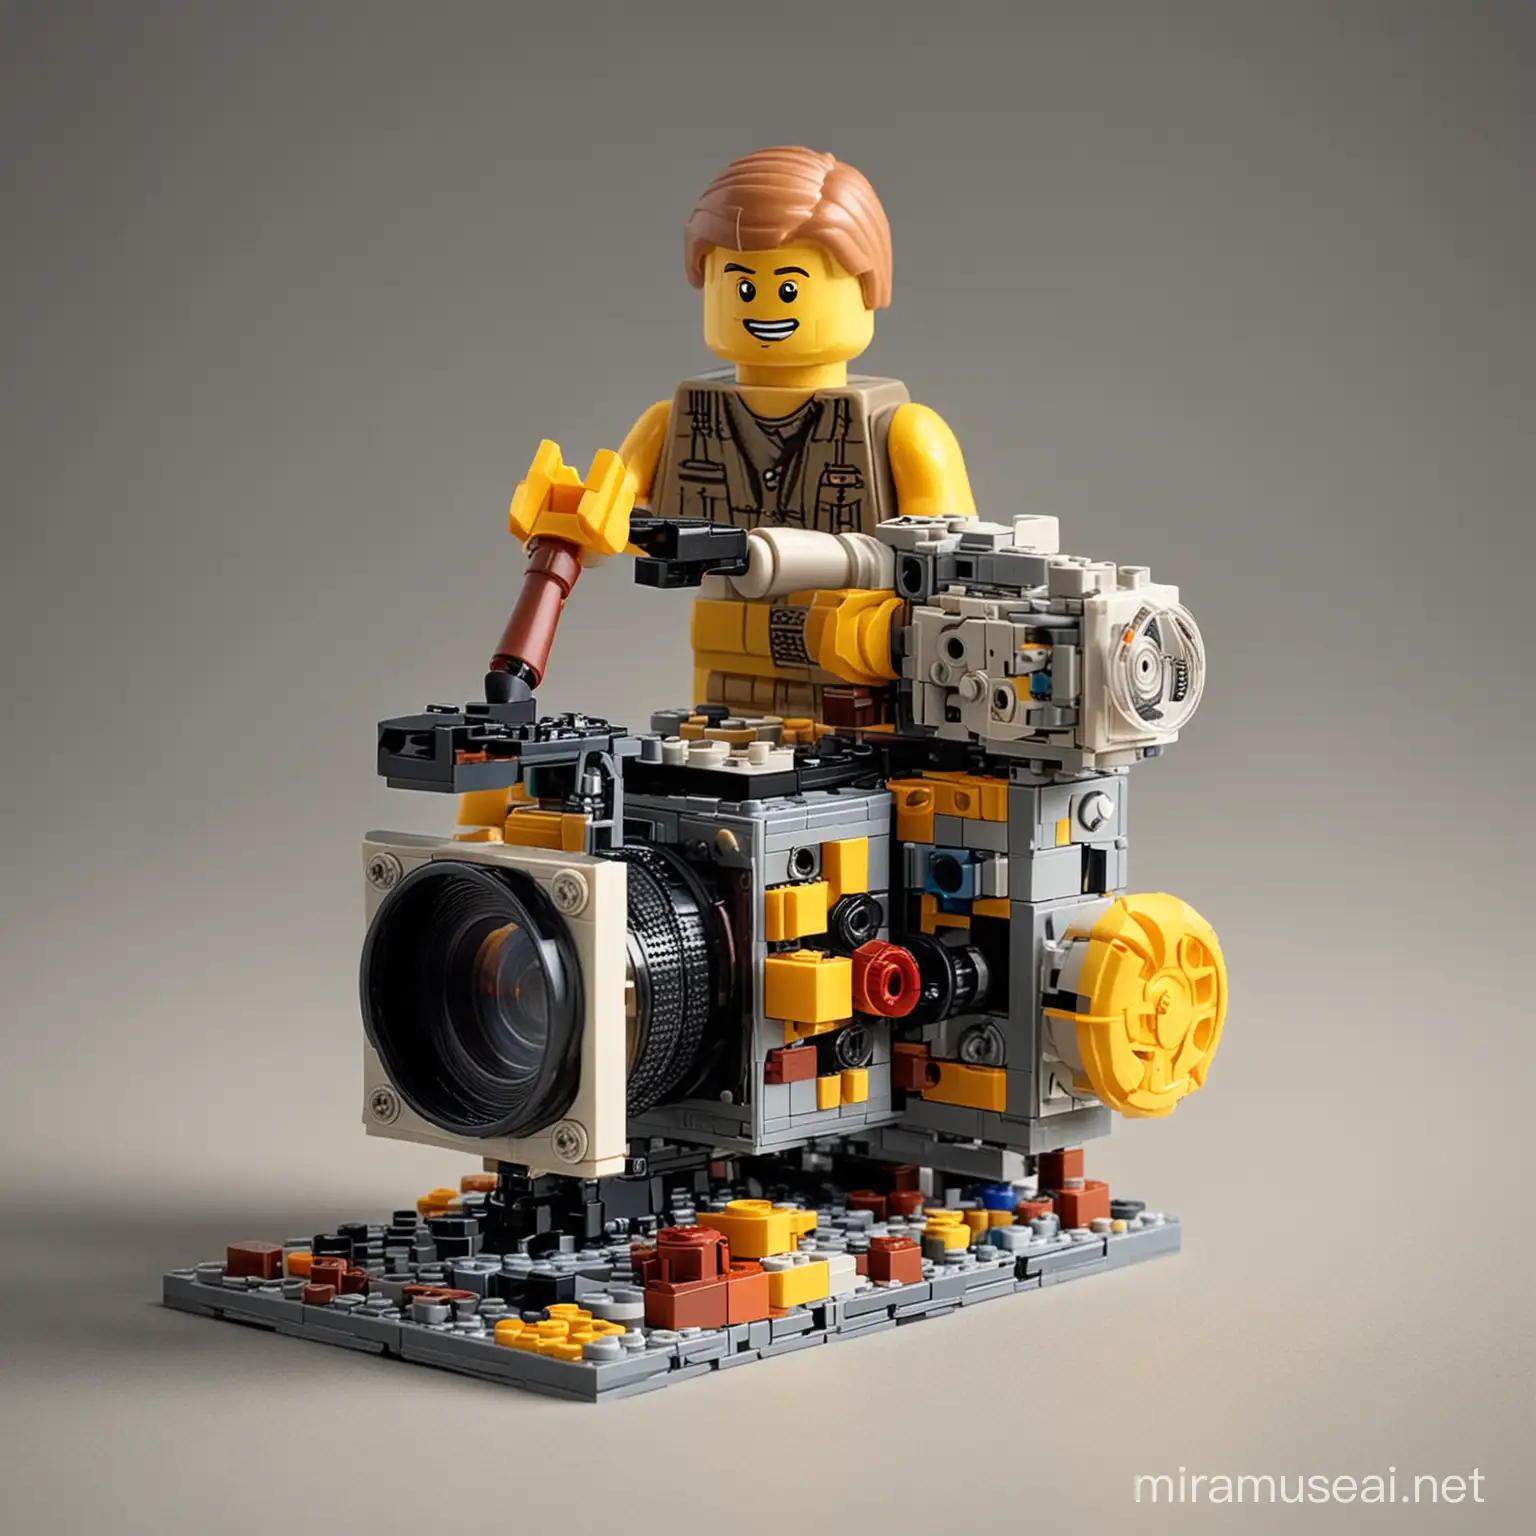 video camera made of lego bricks half built, being assemble by working man,